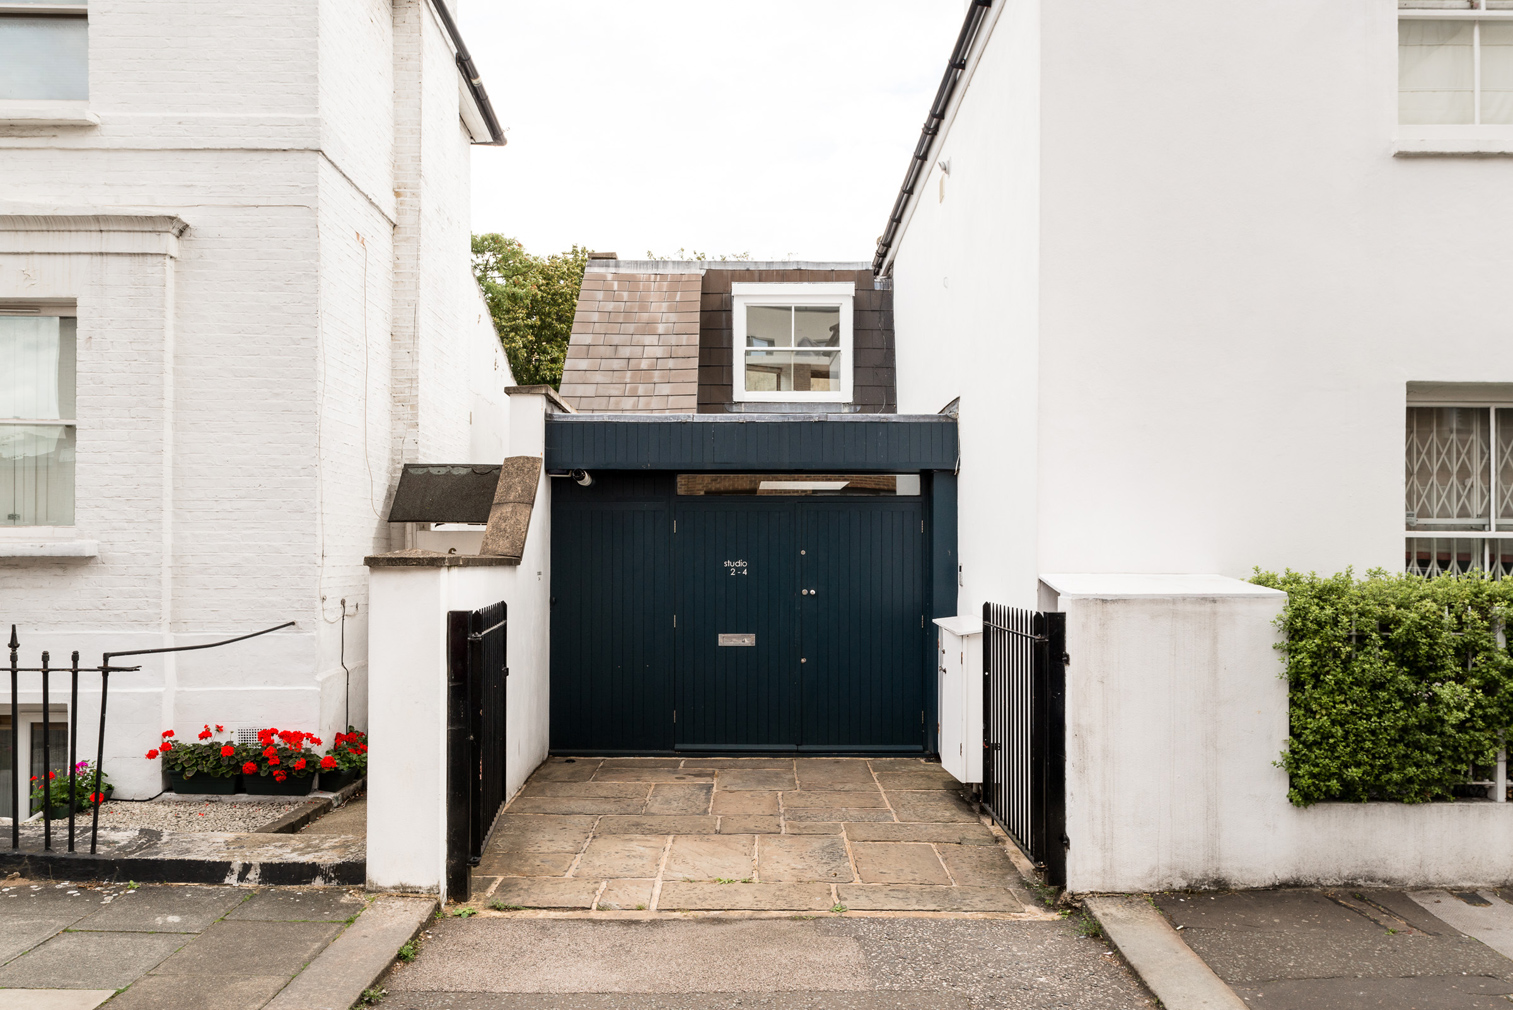 Garage conversion for sale in west London